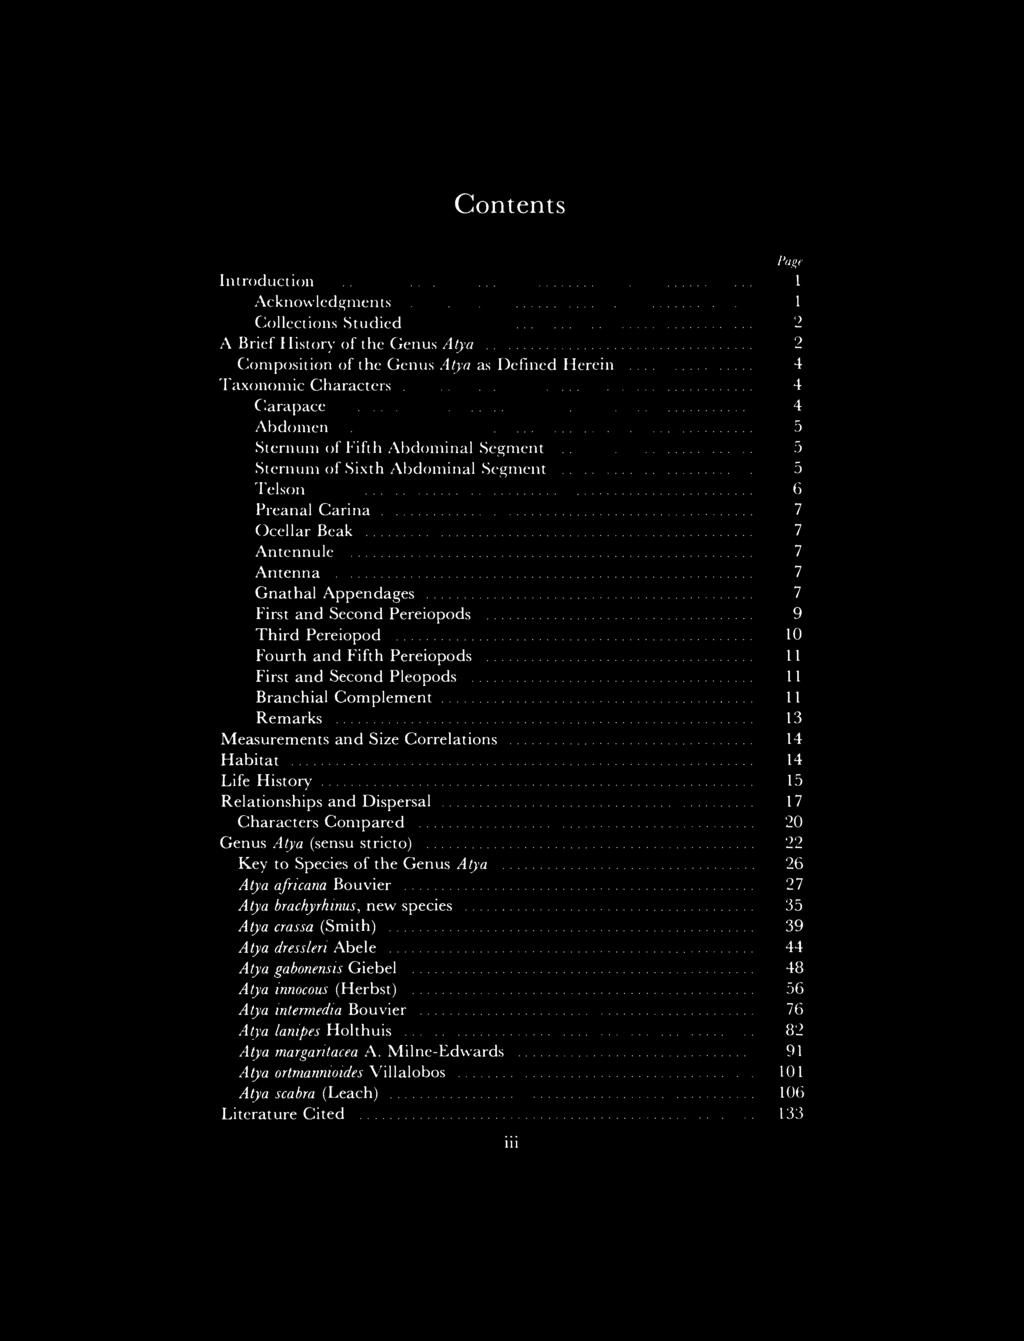 Contents Page Introduction 1 Acknowledgments 1 Collections Studied 2 A Brief History of the Genus Atya 2 Composition of the Genus Atya as Defined Herein 4 Taxonomic Characters 4 Carapace 4 Abdomen 5